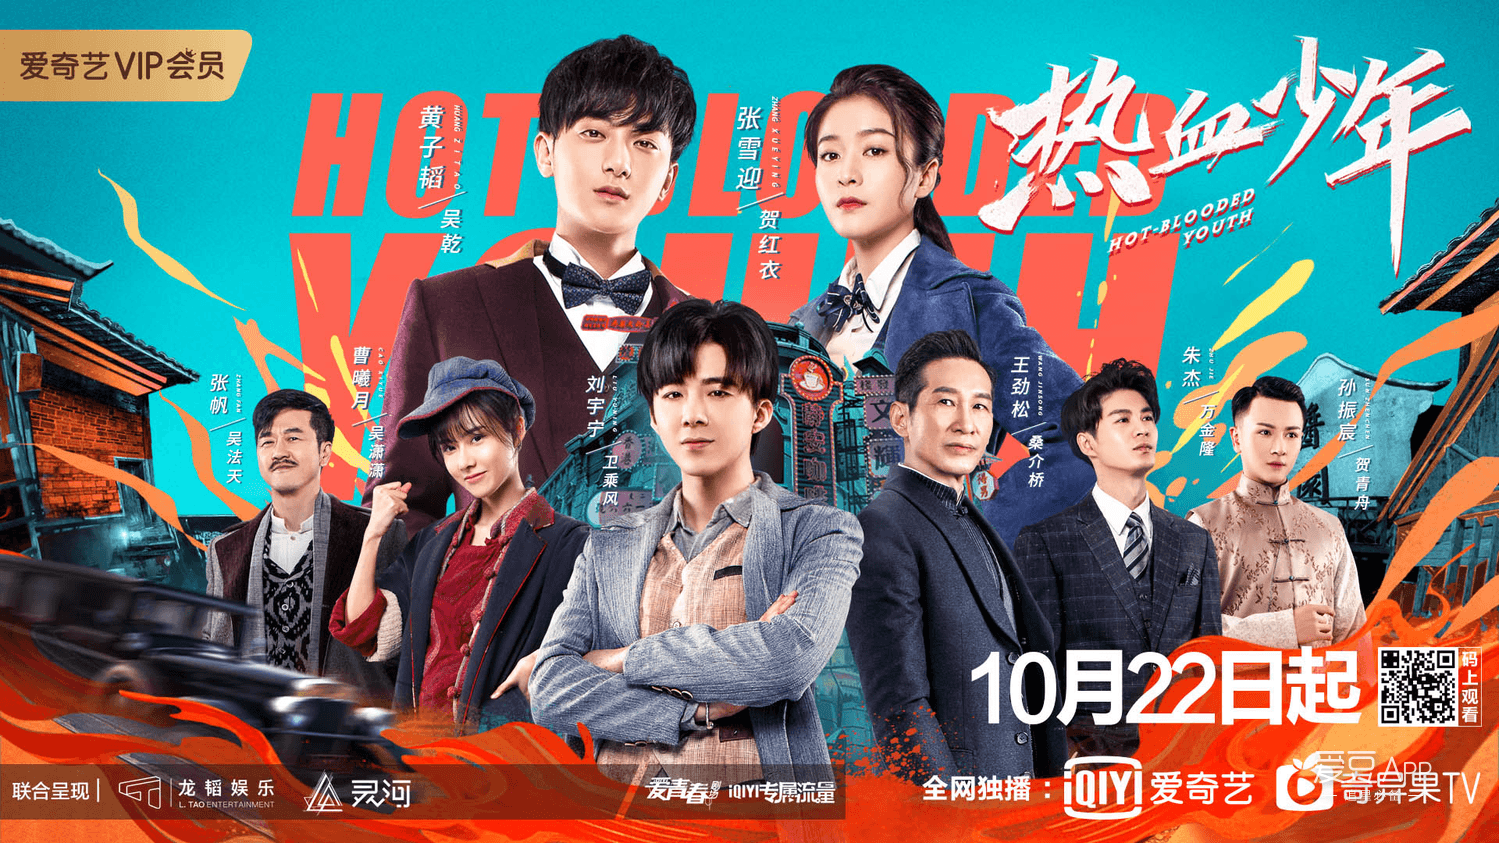 Hot Blooded Youth Ep 8 Eng Sub (2019) Chinese Drama